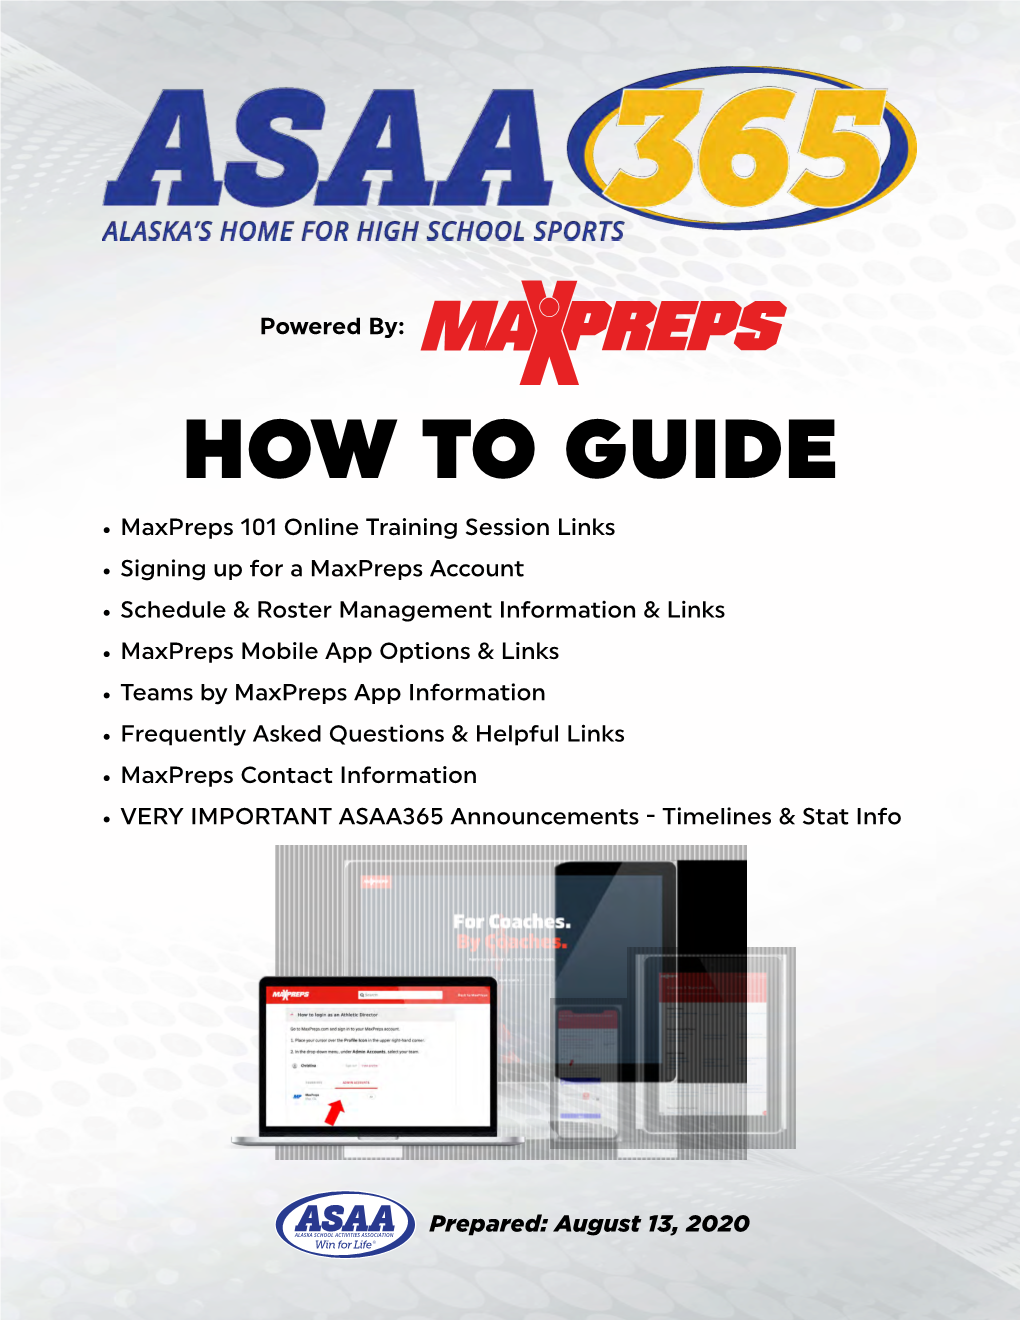 Maxpreps How to Guide for Instructions